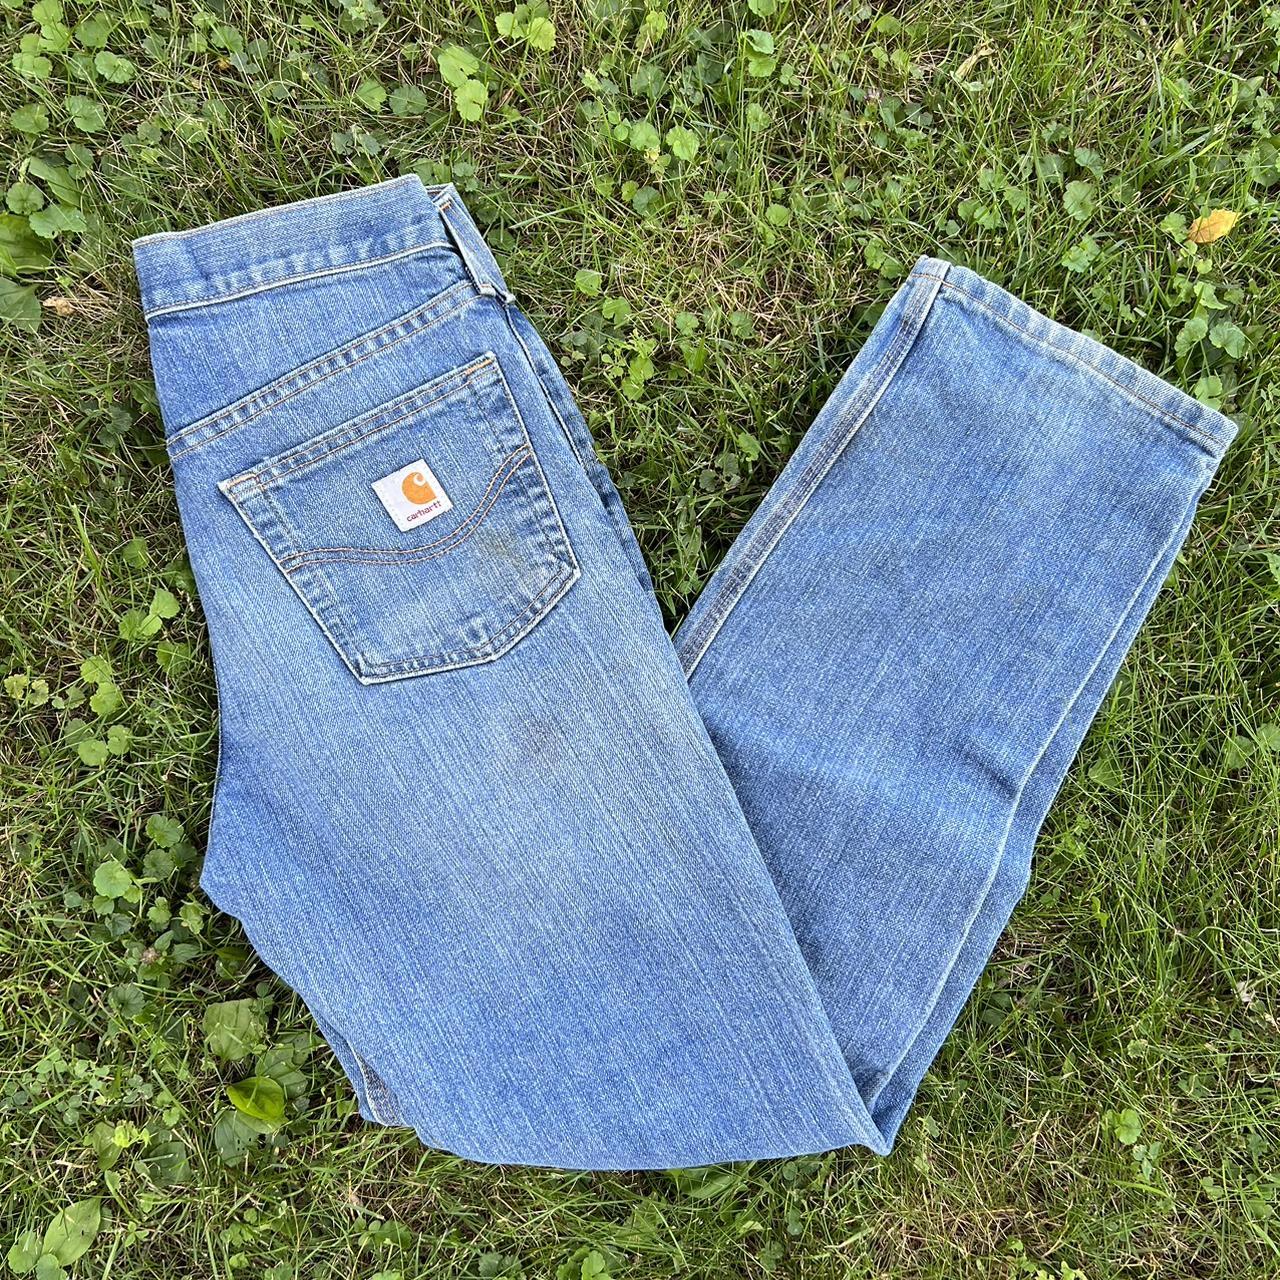 Vintage Carhartt jeans! In alright condition with a... - Depop